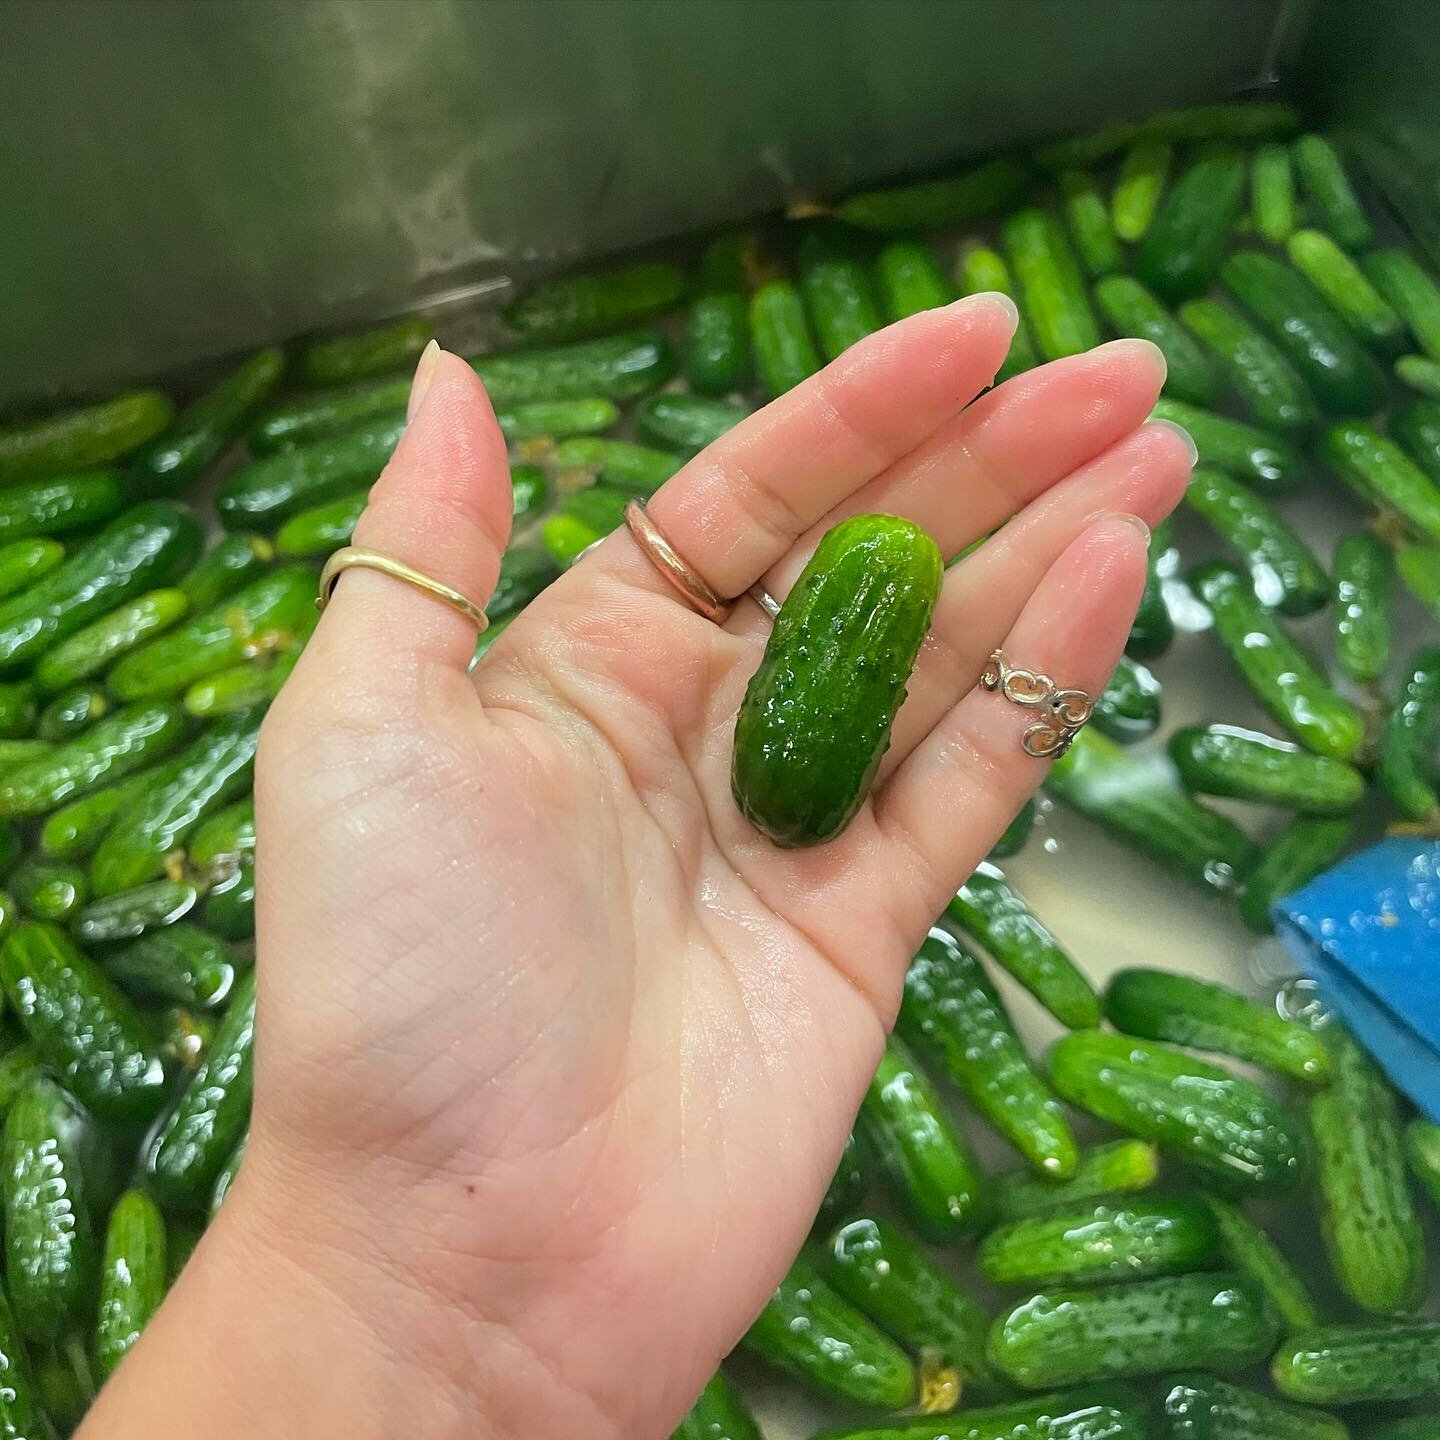 tiny tot

size doesn&rsquo;t matter

#pickles #dillpickles #gherkins #fermentedfoods #homemadepickles #picklesarelife #gherkinsarelife #nobigdill #babycukes #babycukesarethebest #chicagopickles